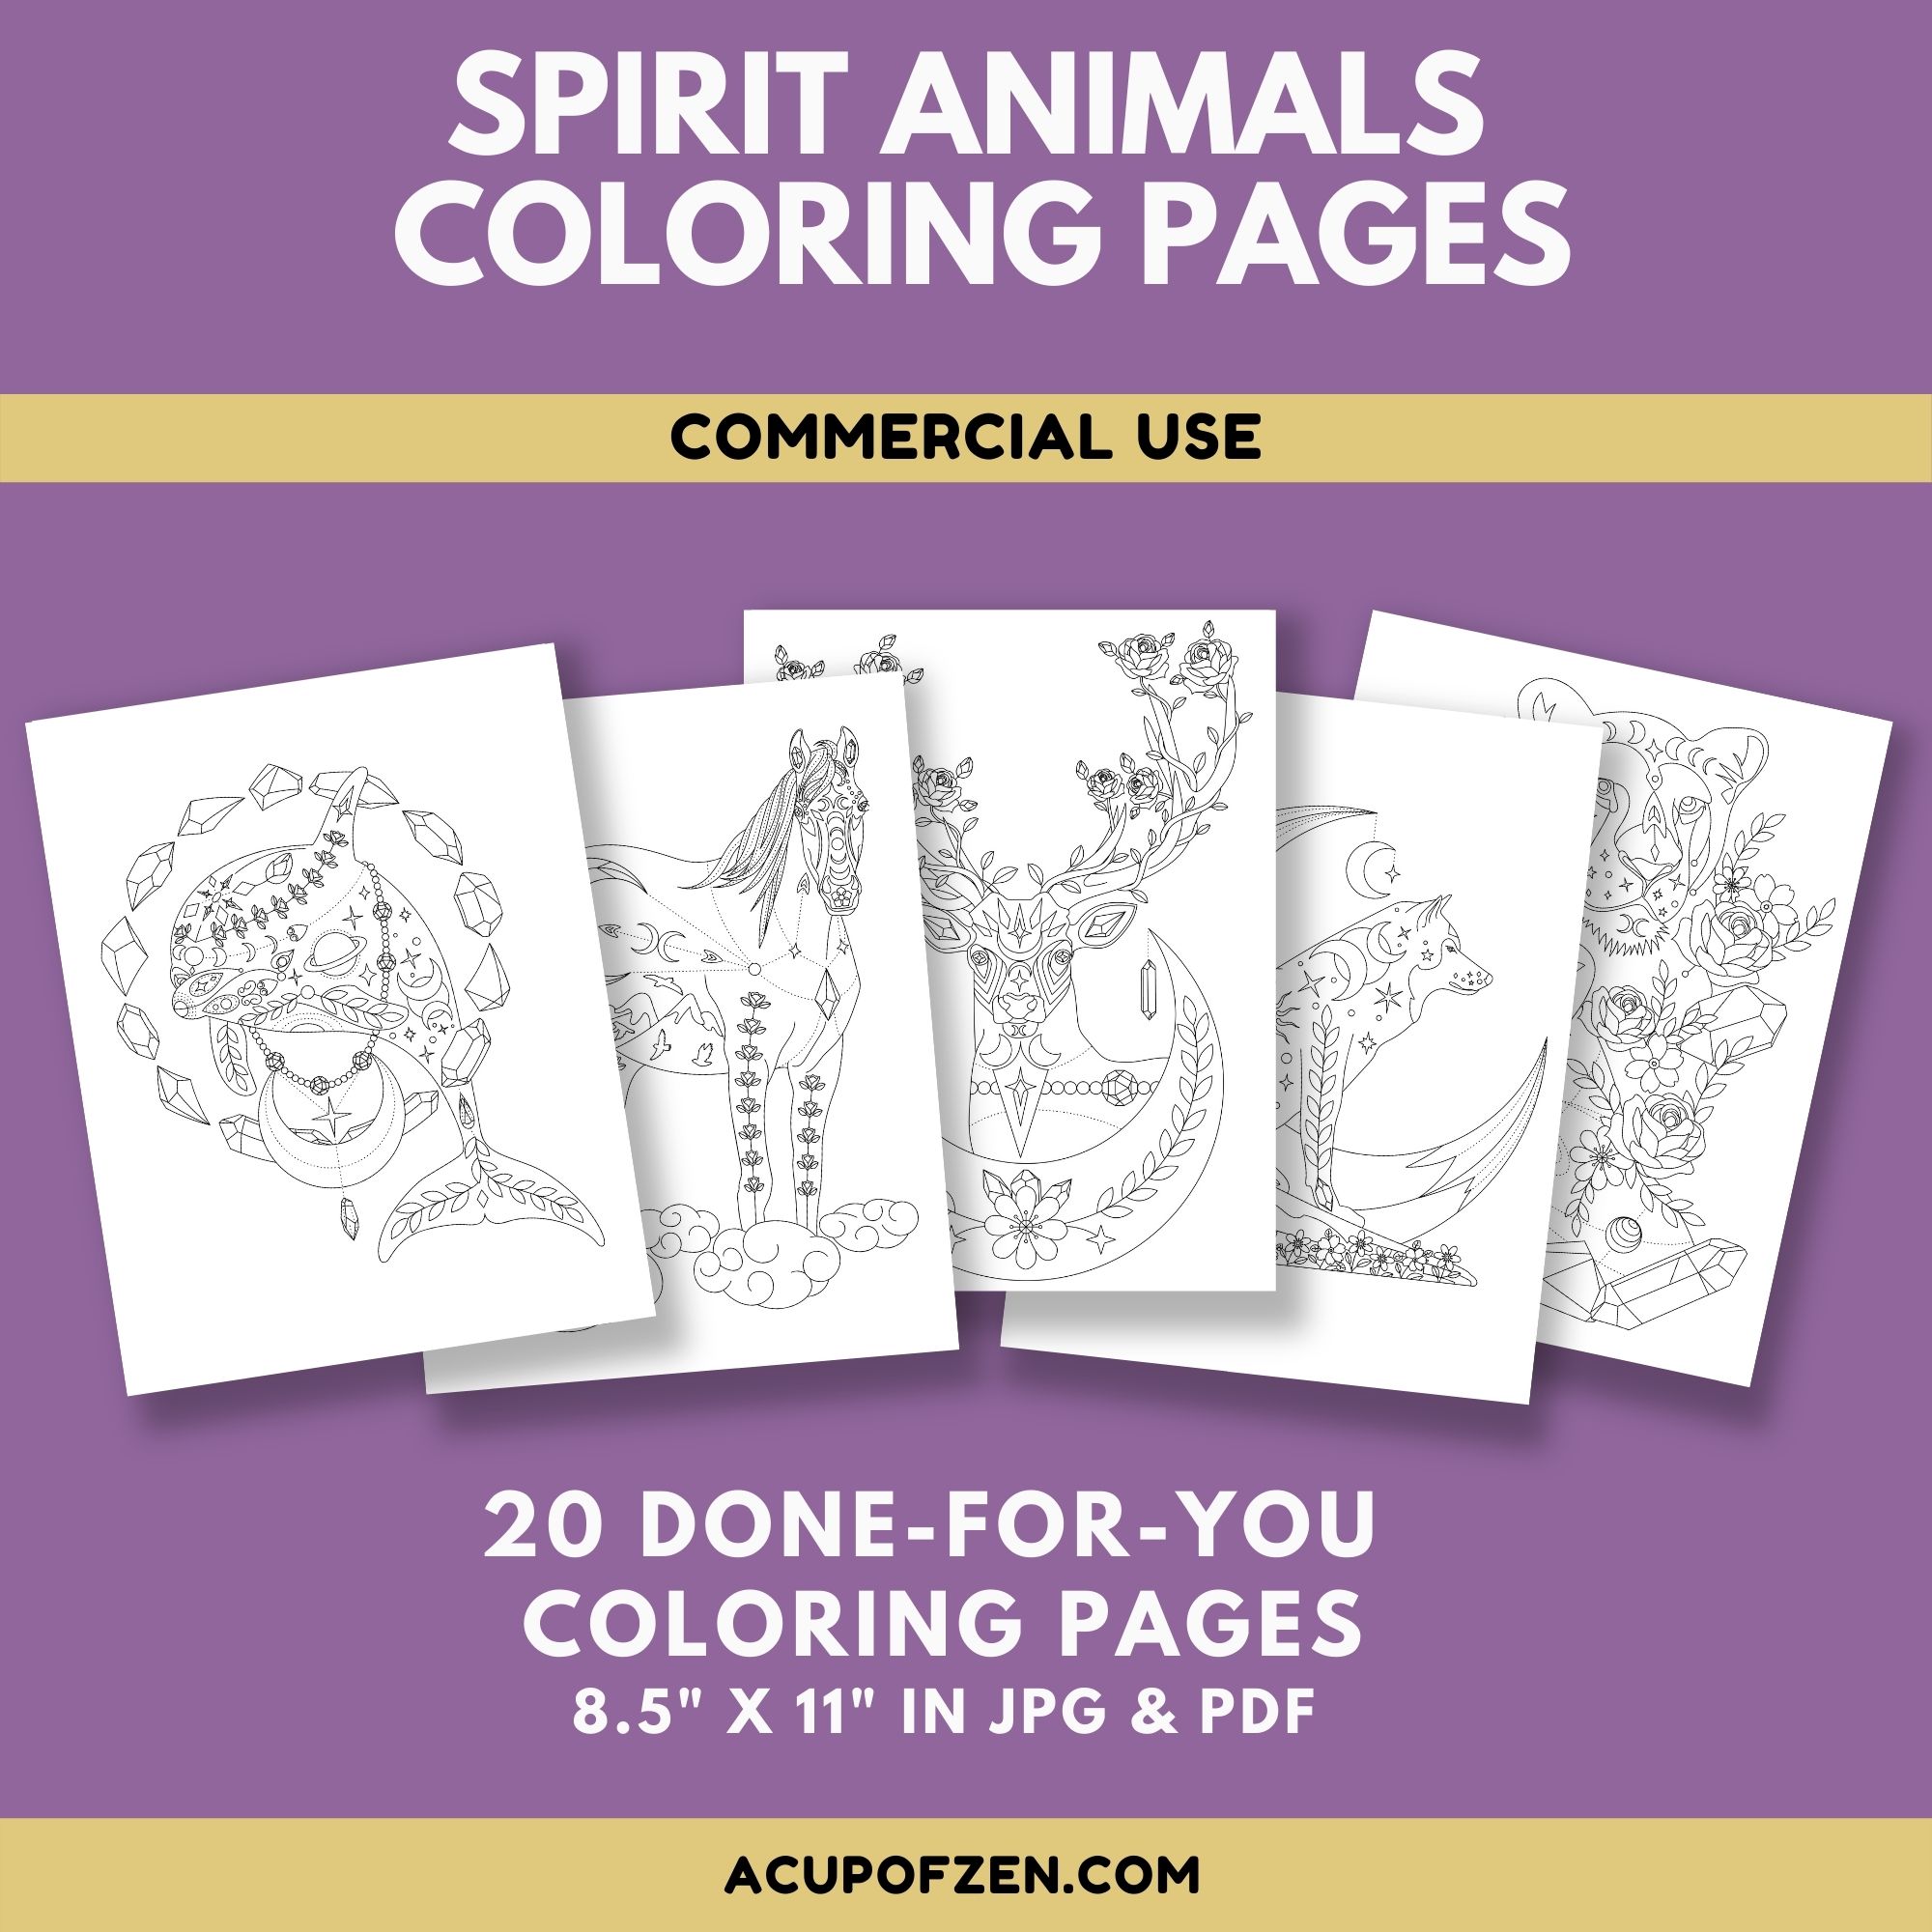 Spirit Animals Coloring Pages Commercial Use